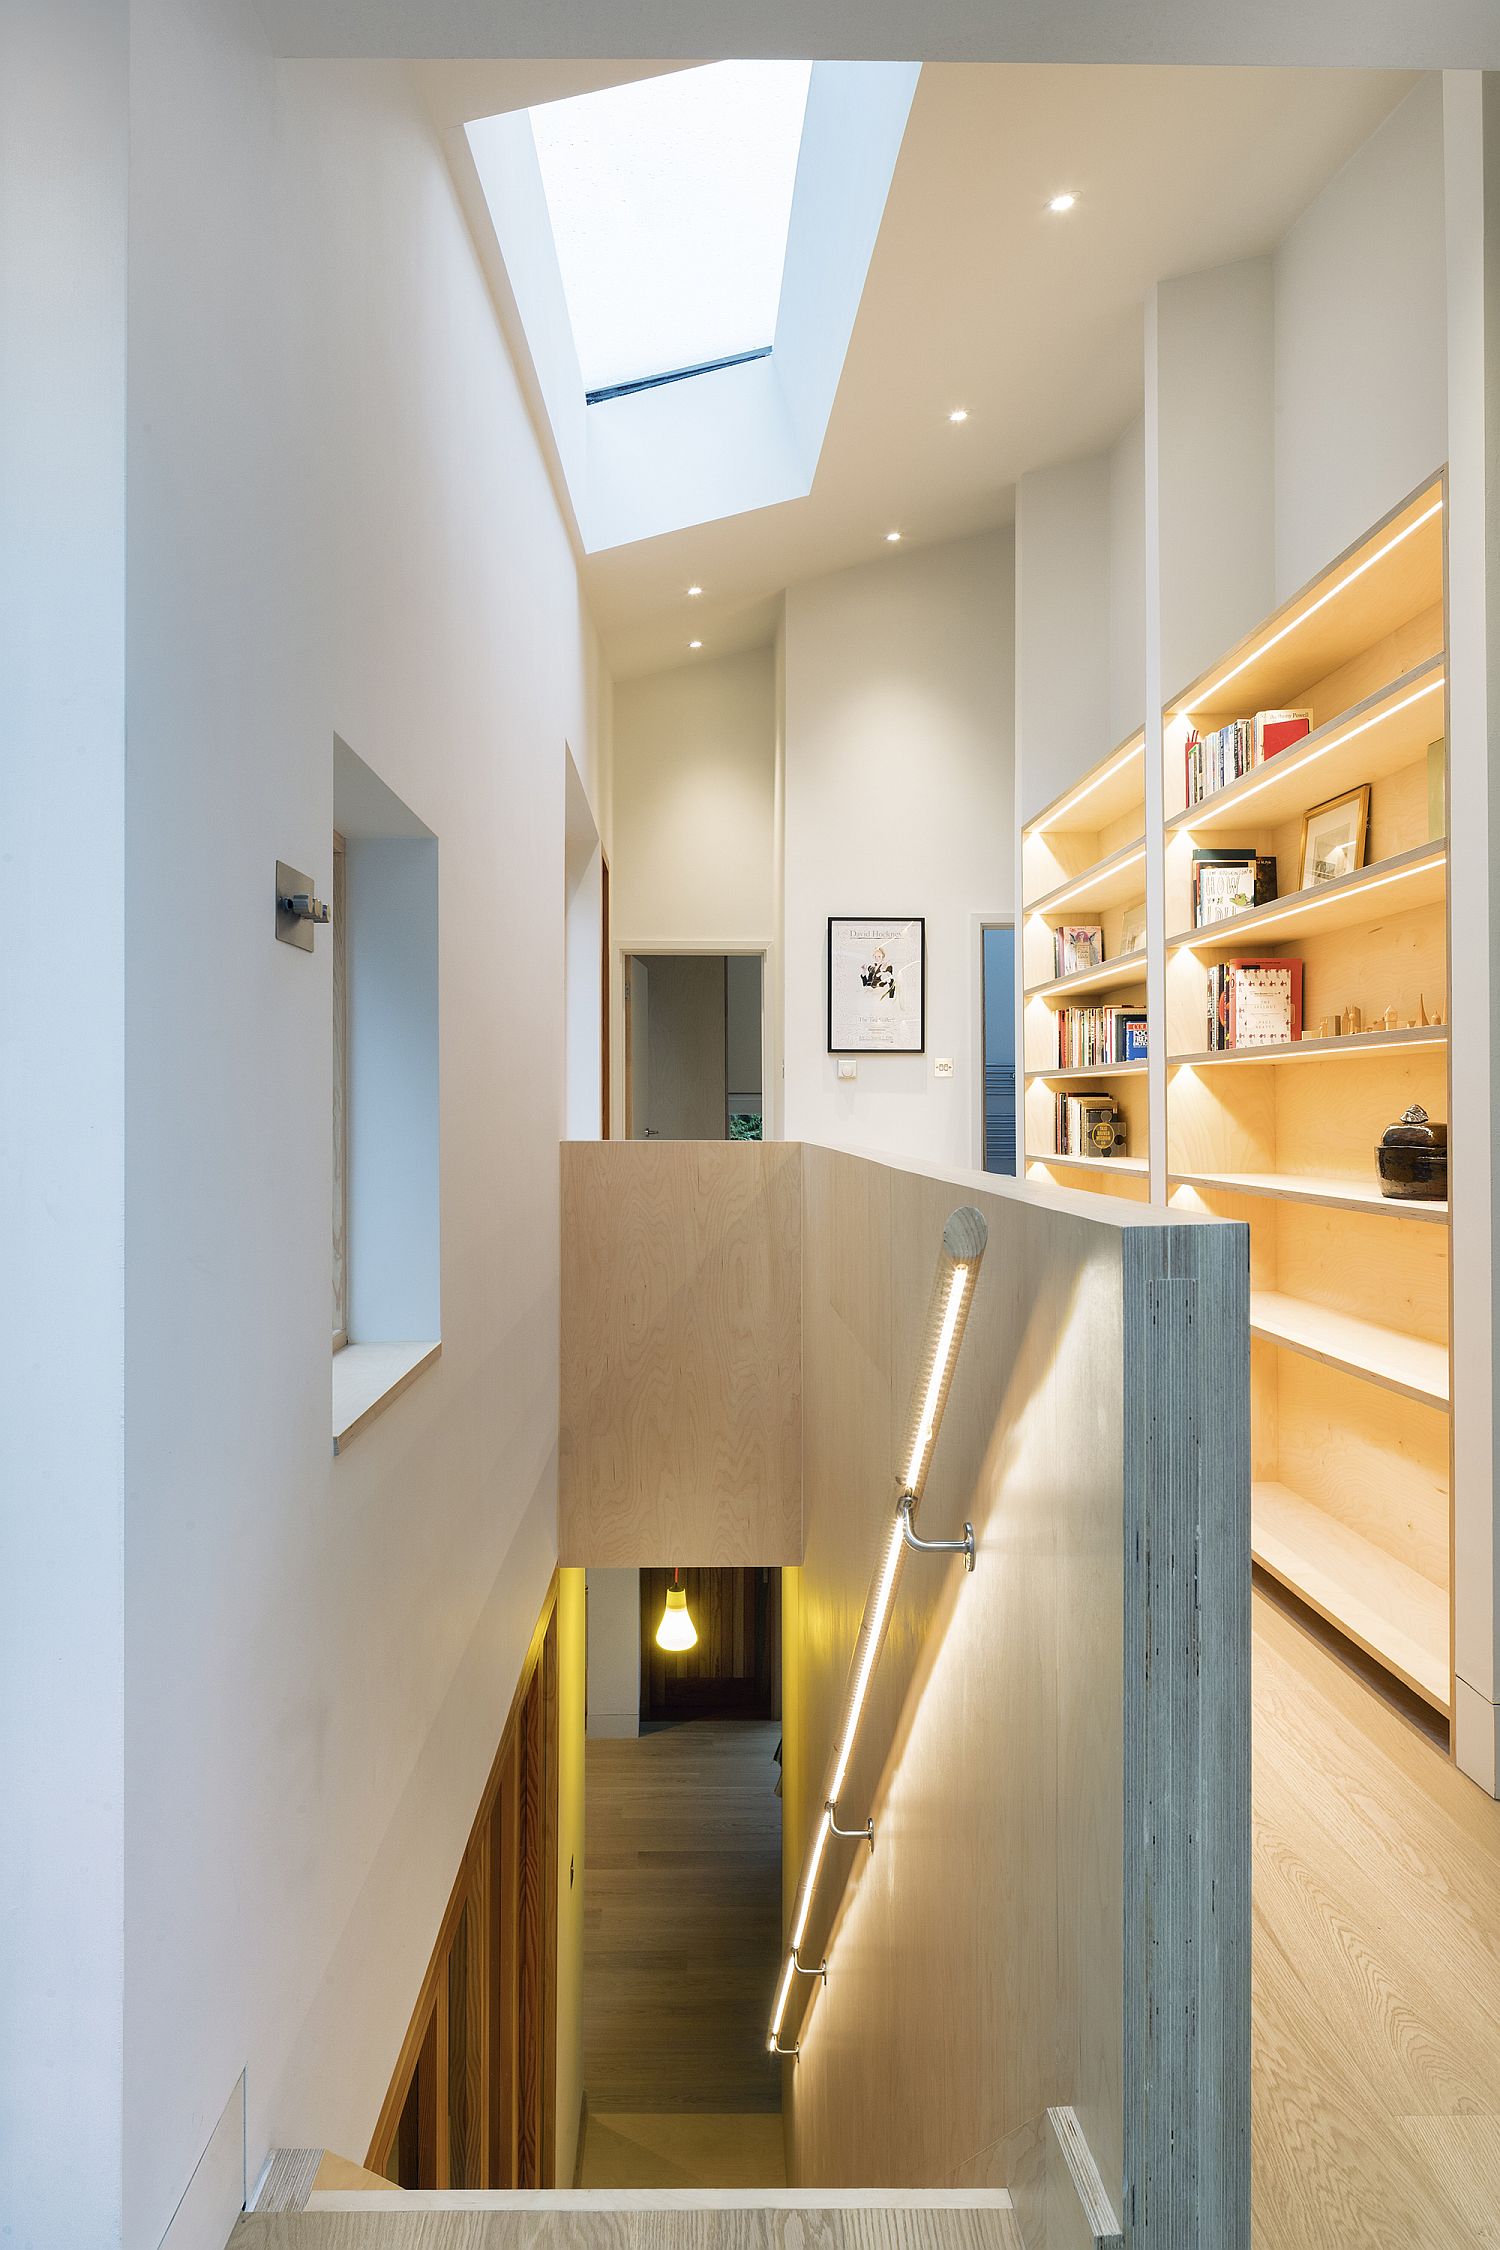 Skylight illuminates the staircase while bringing light to the lower level